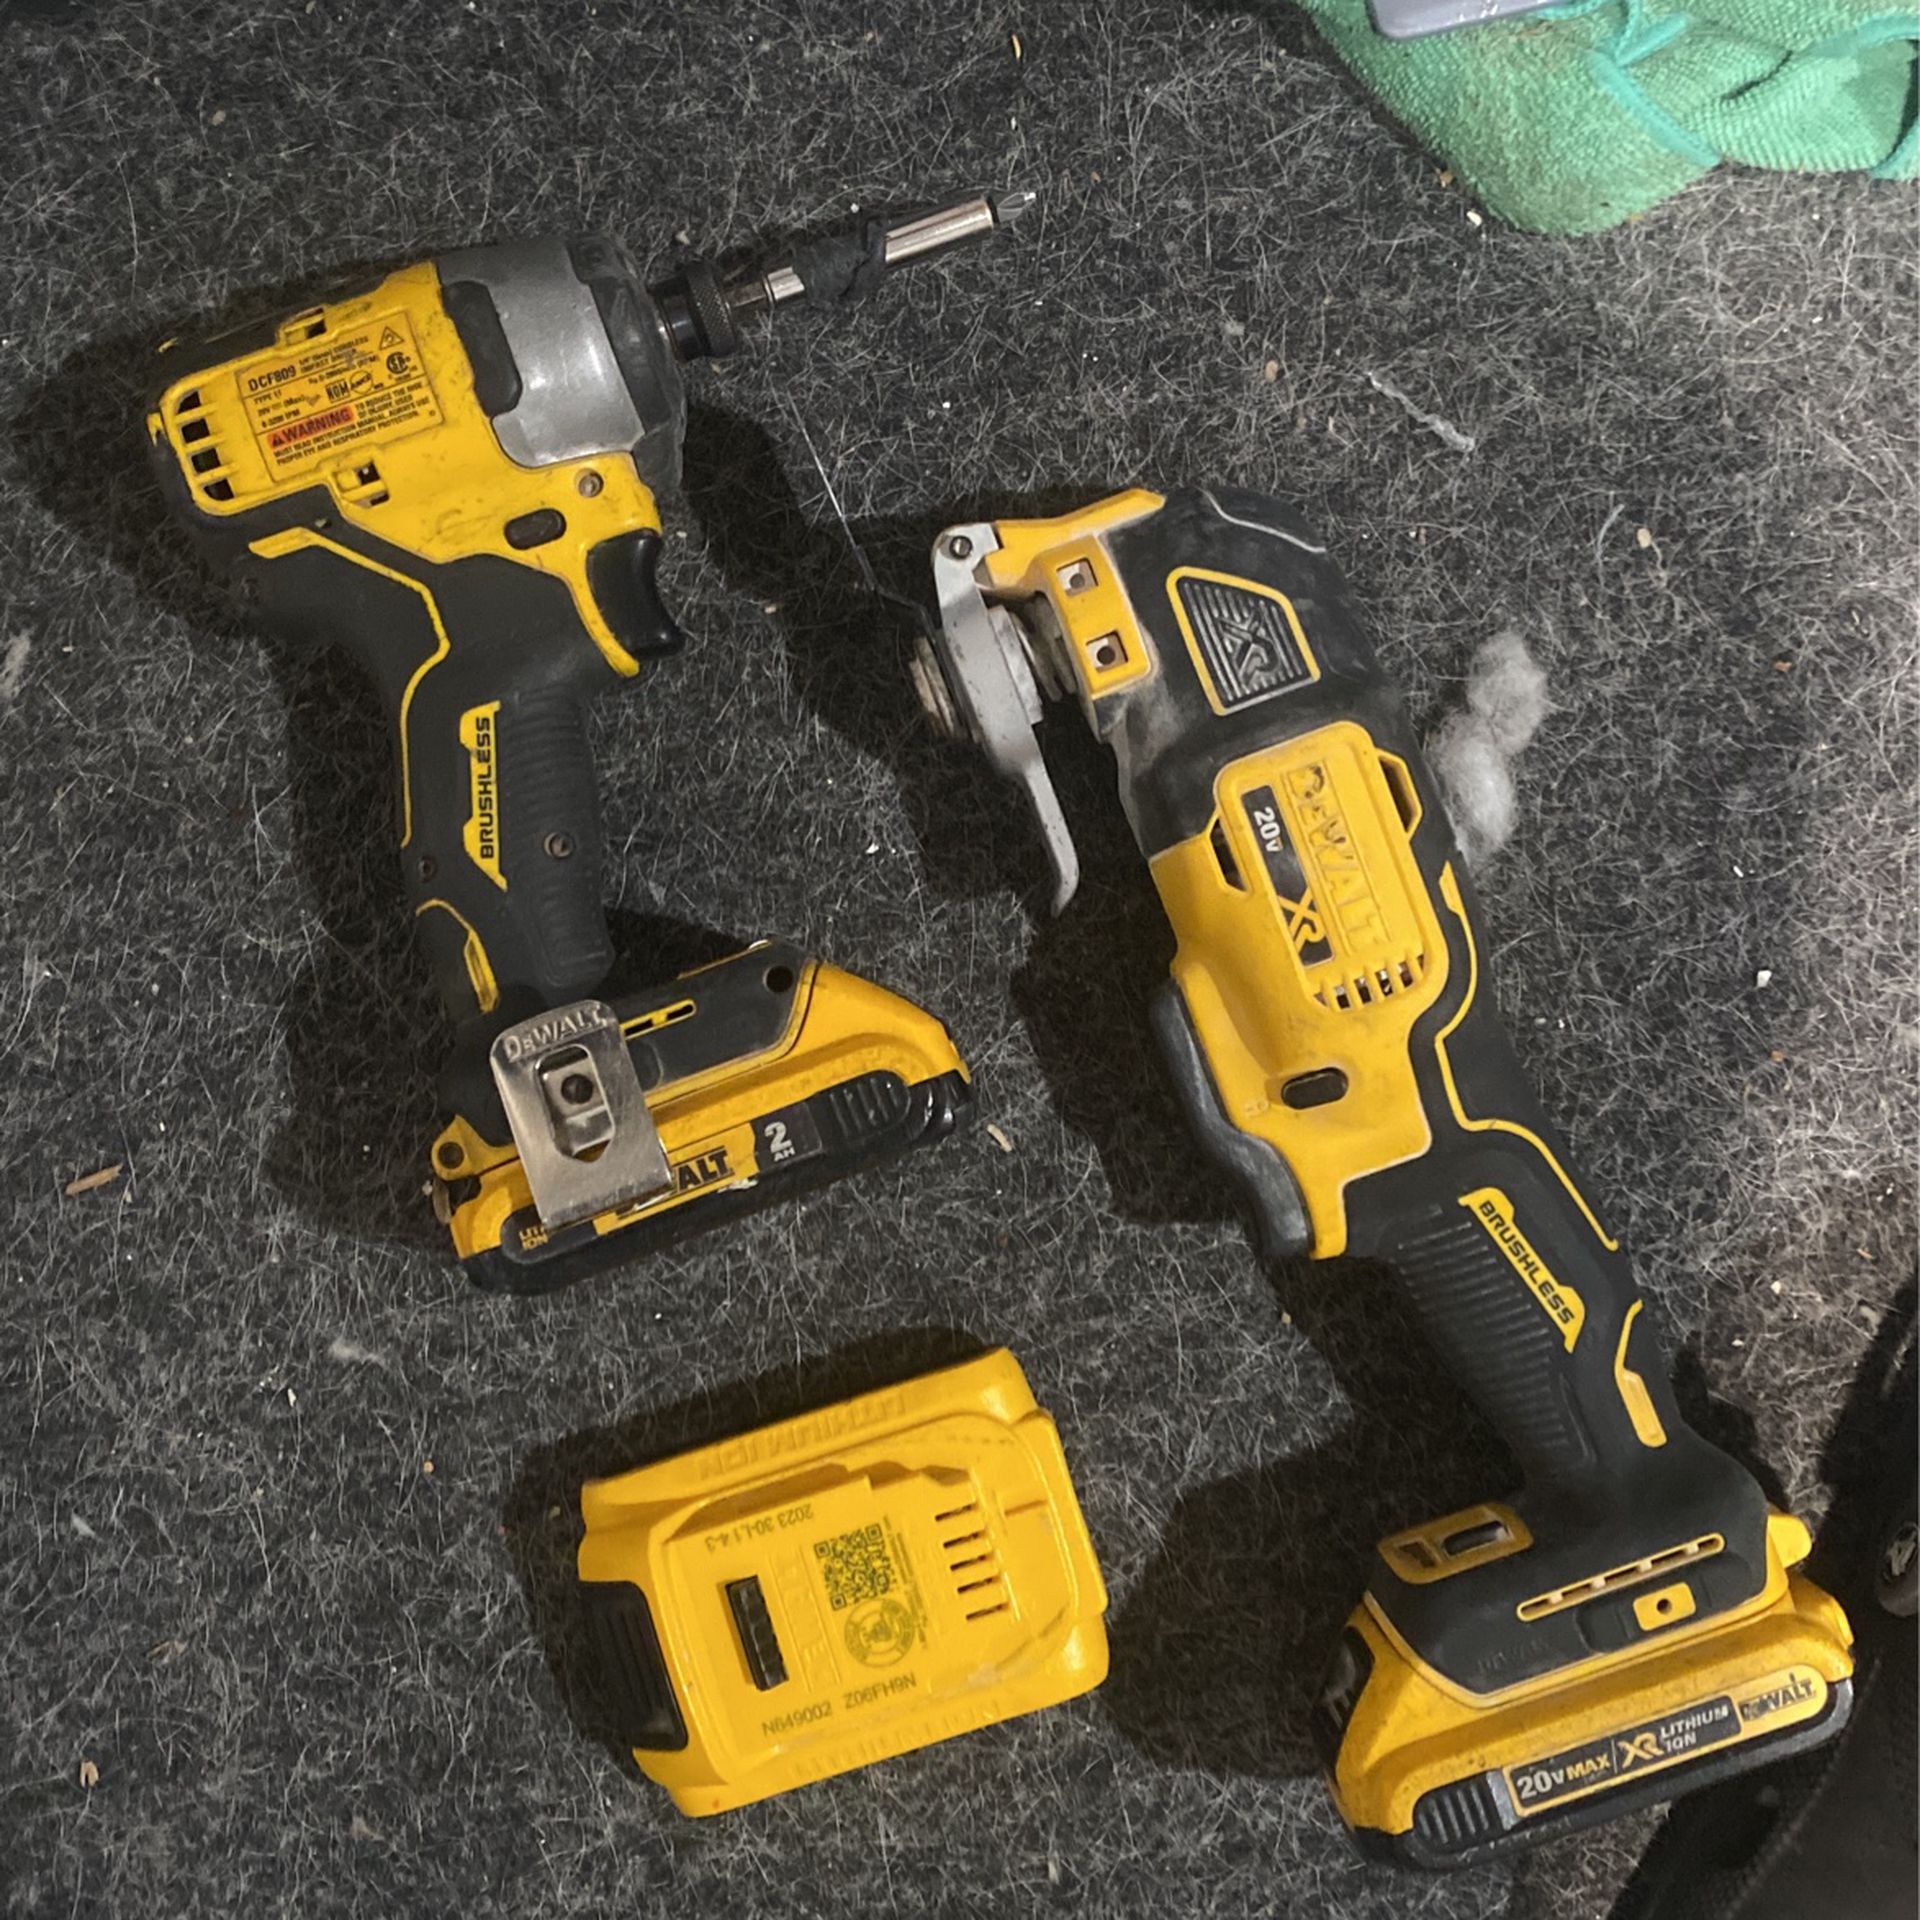 Dewalt Hammer Drill And Grinder With 3 Batteries With Life But No Charger